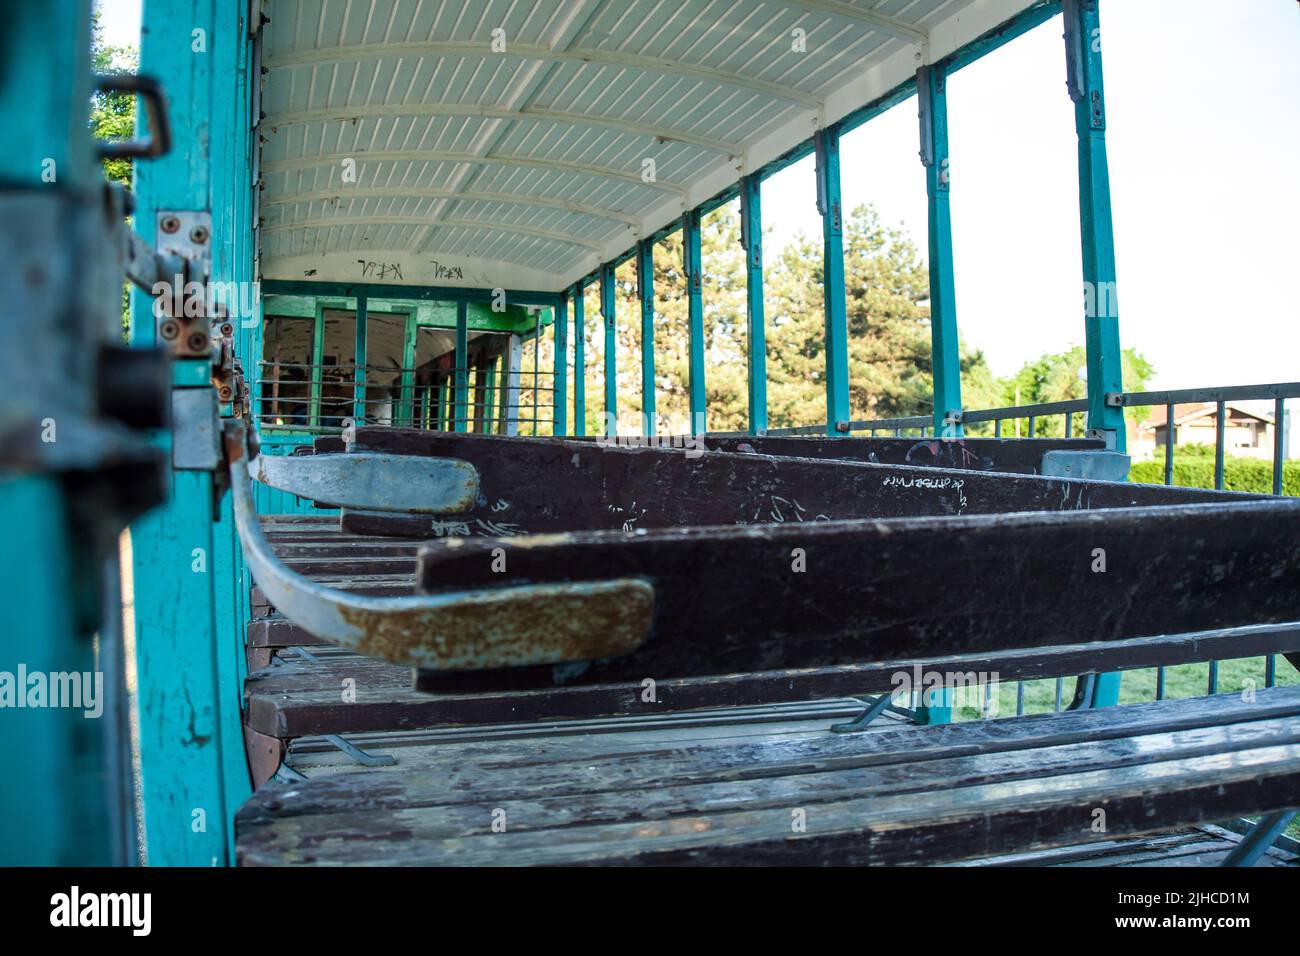 Inside old abandoned rusty wrecked tram Stock Photo